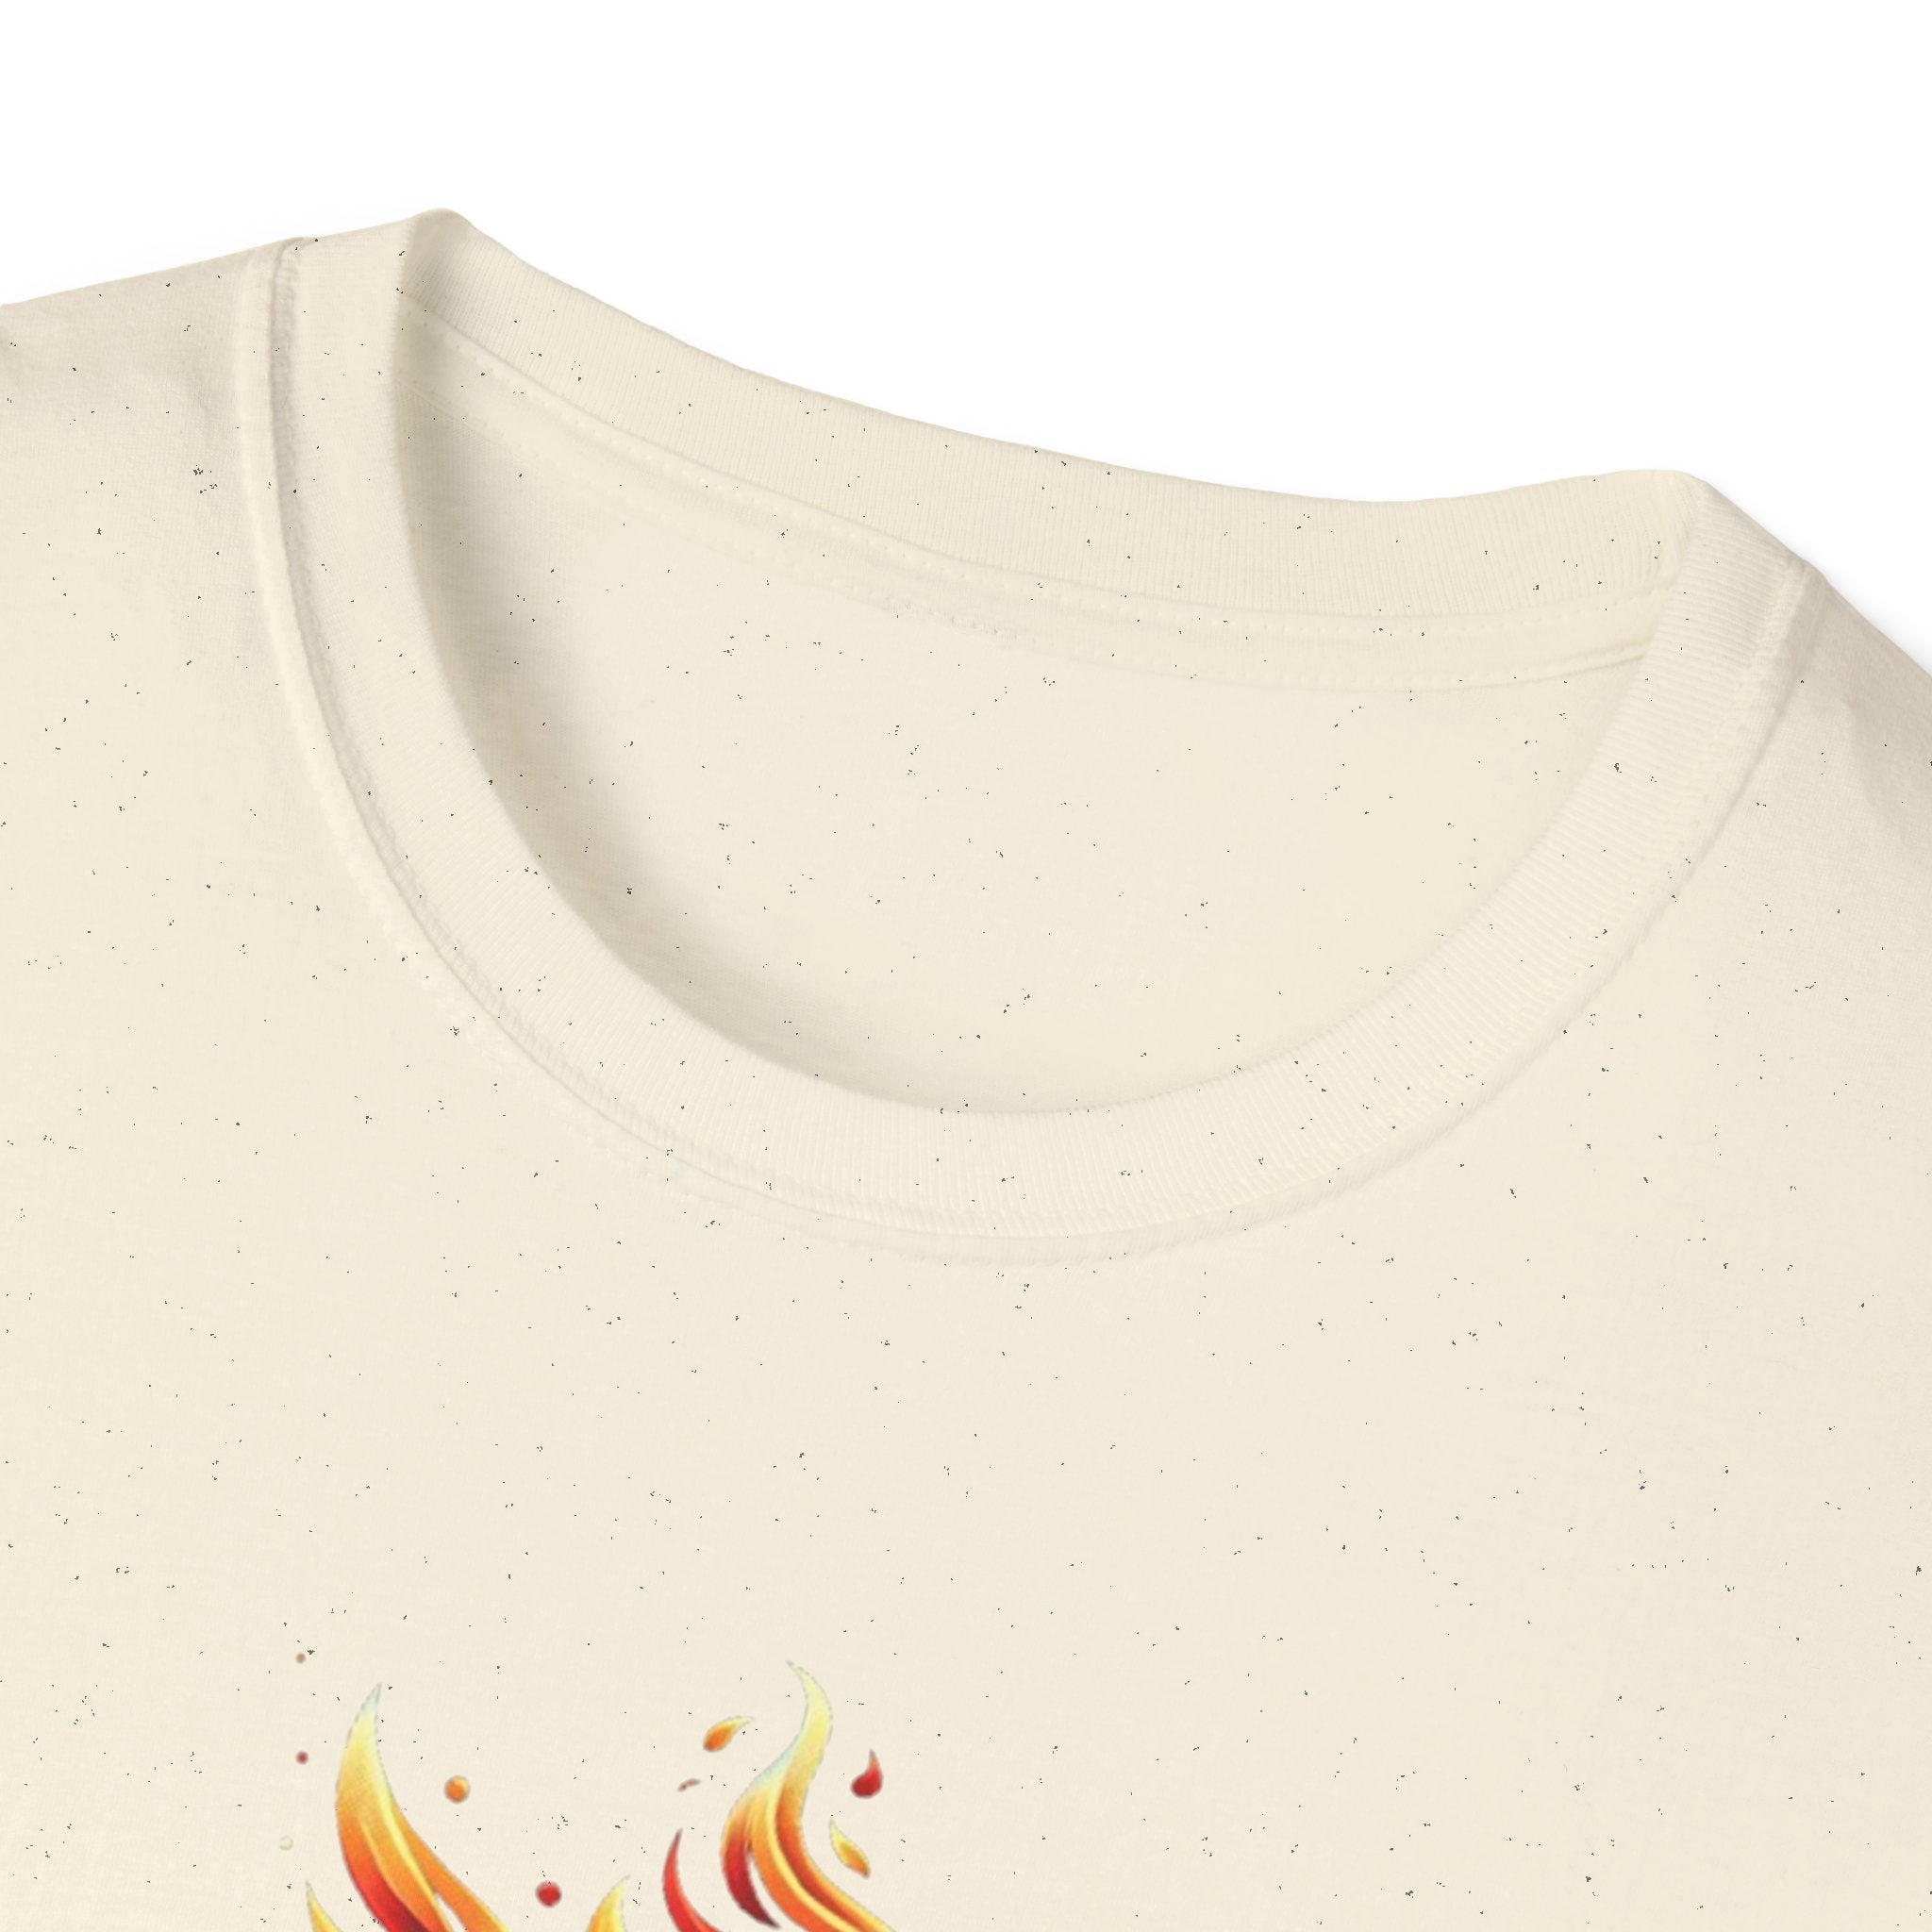 $FUEGO Softstyle T-Shirt